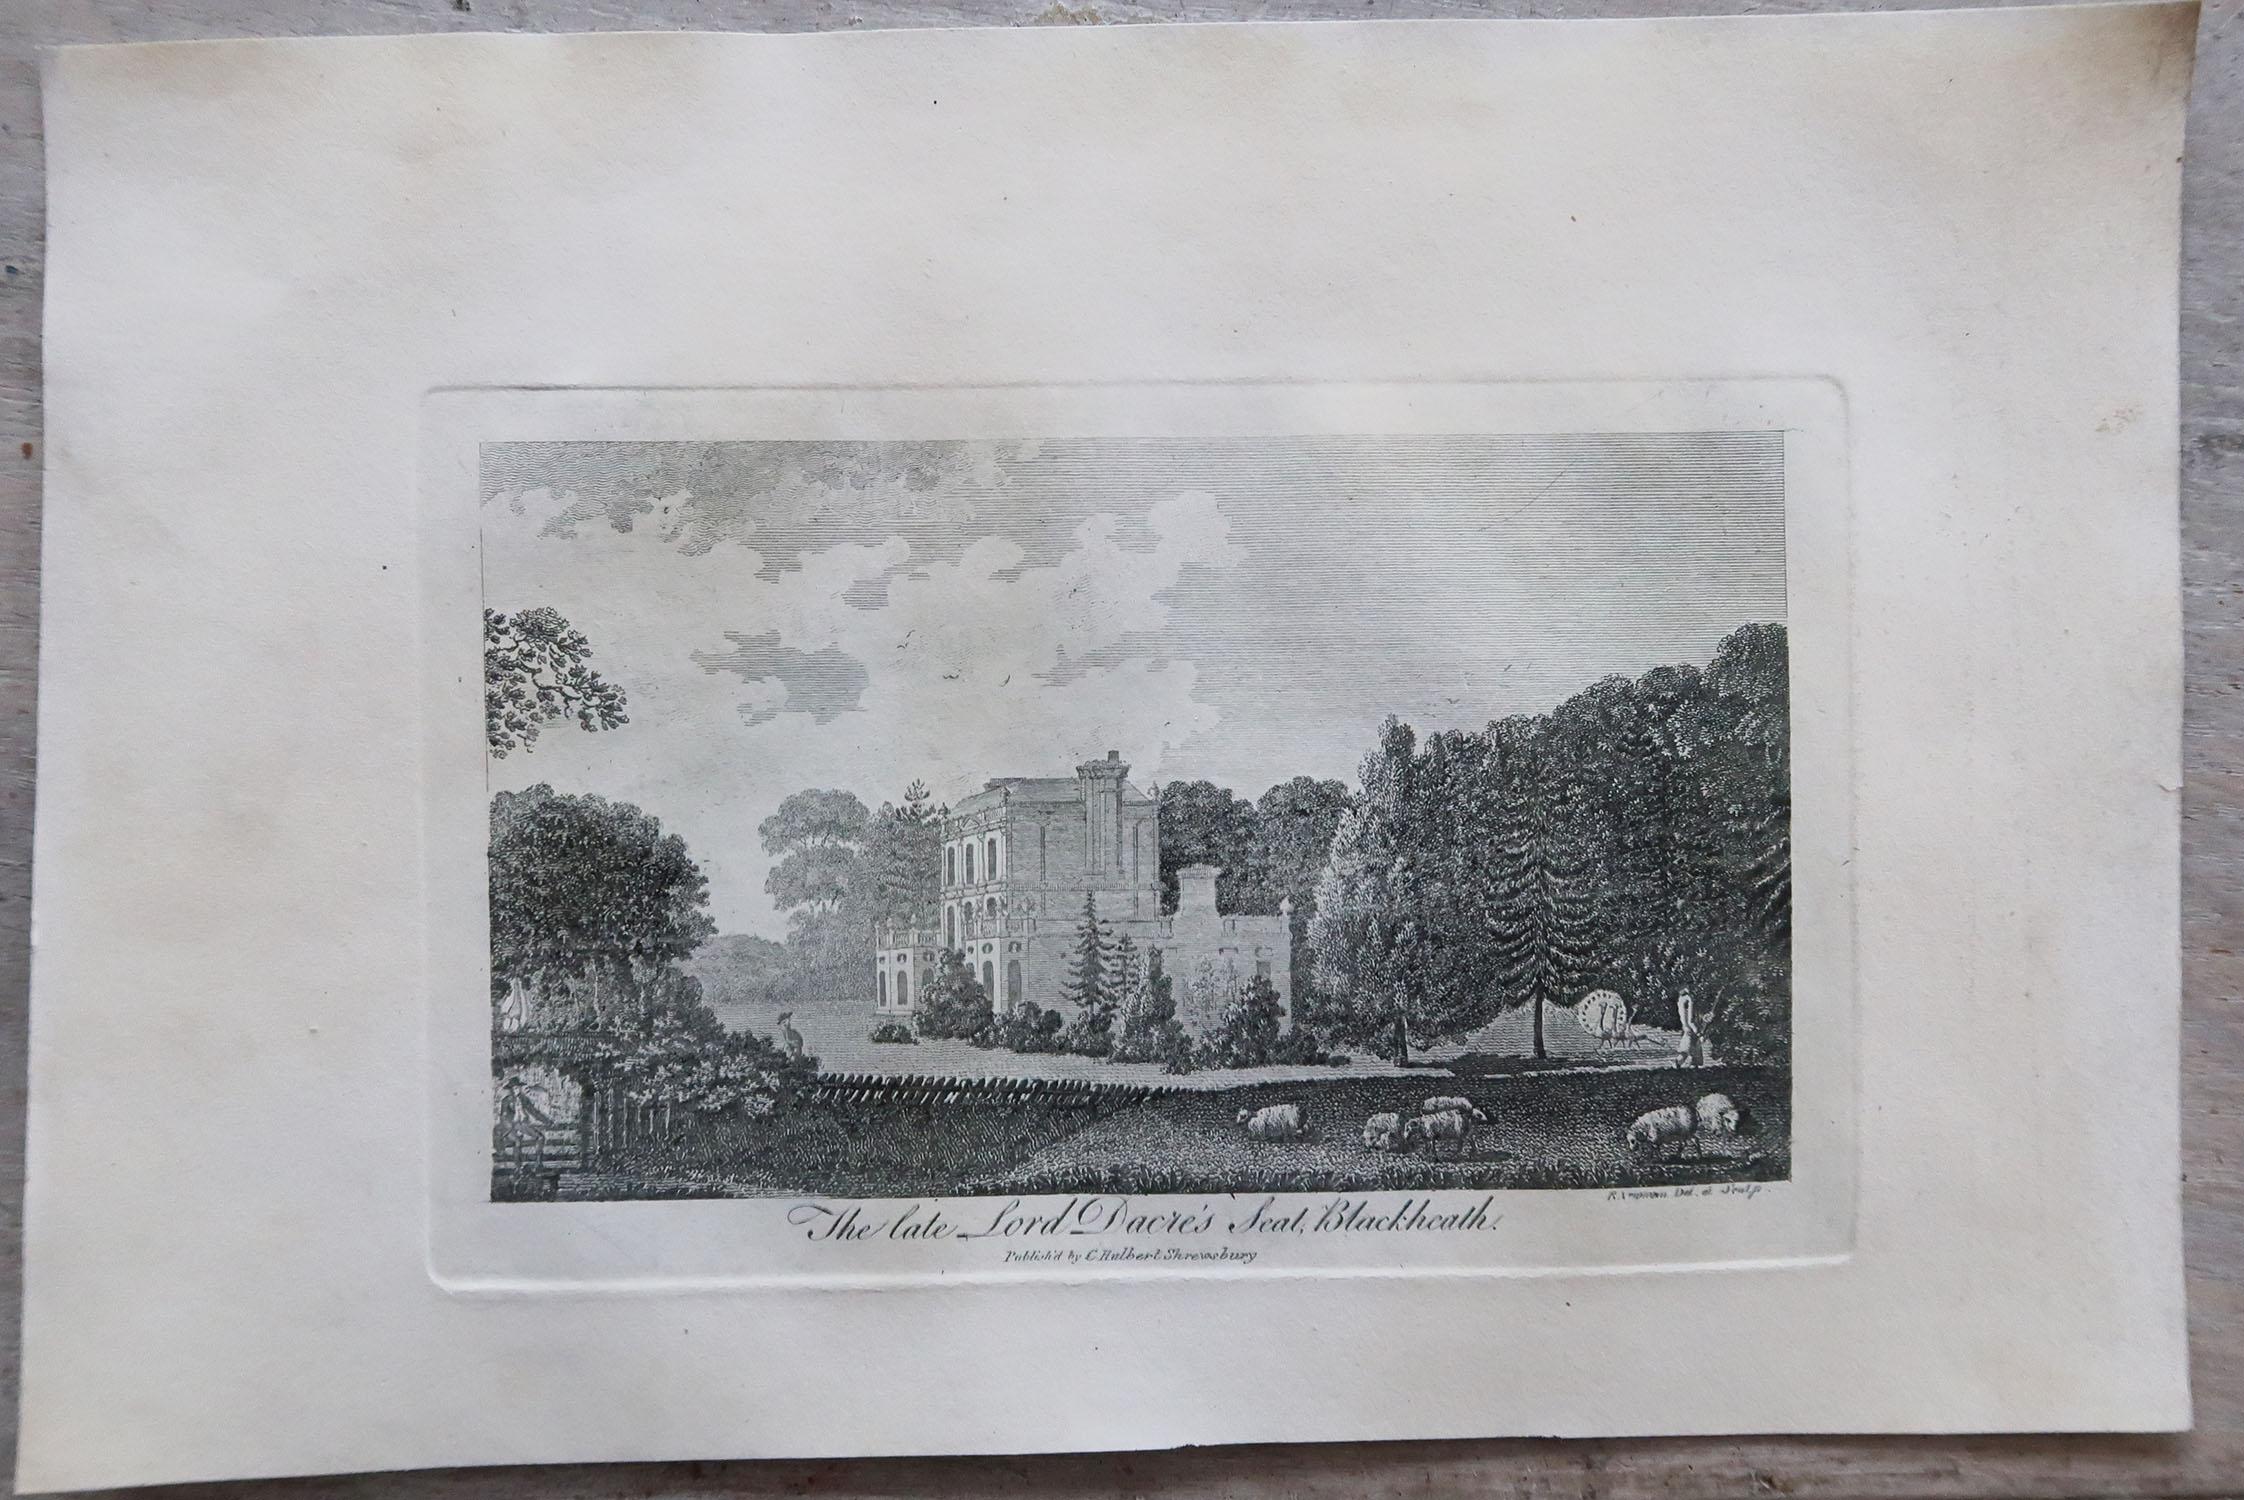 Georgian Set of 12 Antique Prints of English Country Houses and Gardens, circa 1800